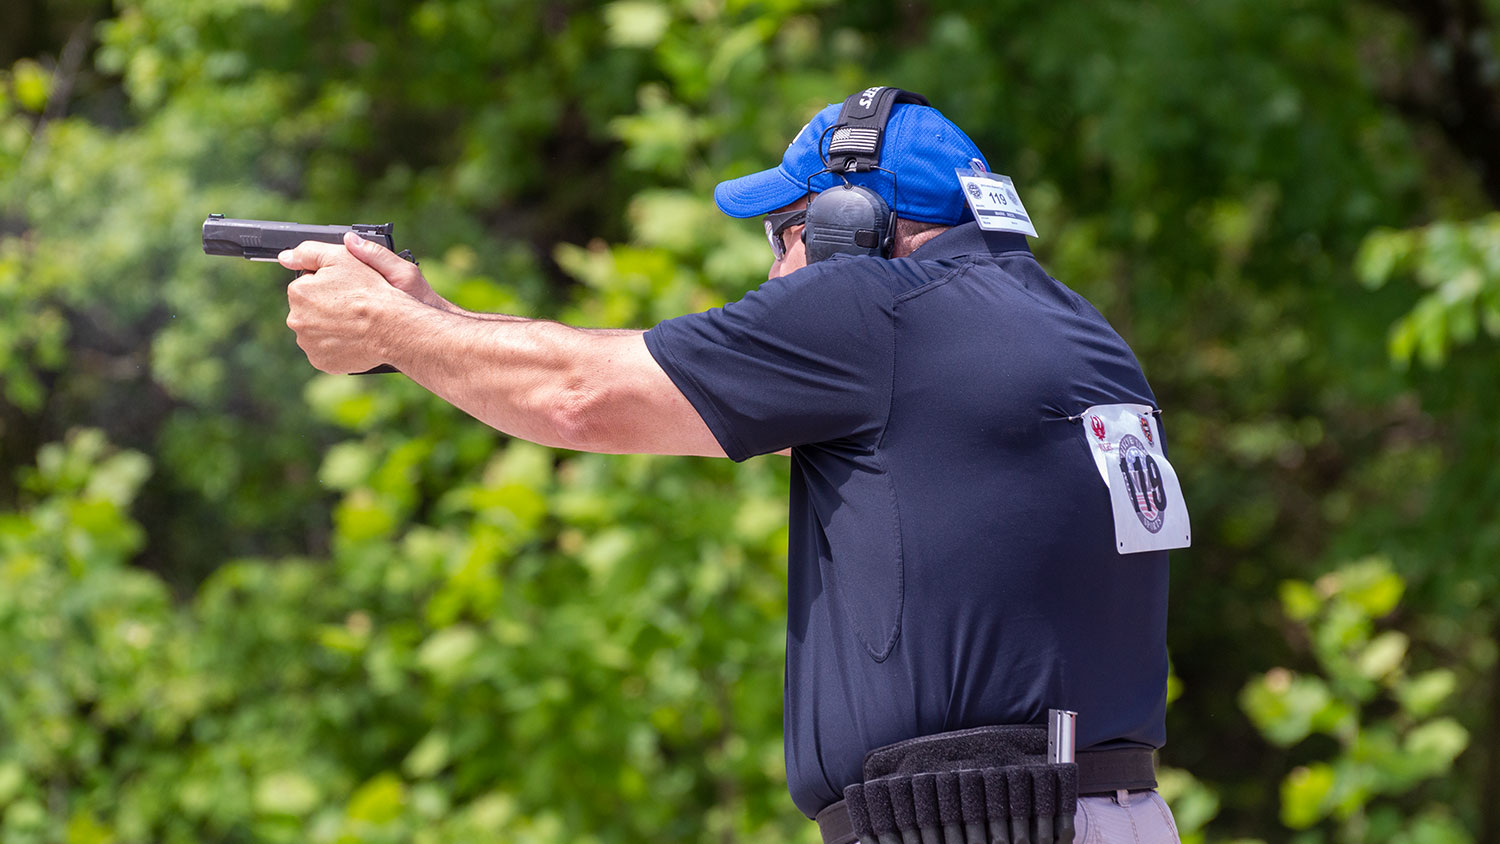 Colt’s Mark Redl shooting the Mover at the 2019 NRA Bianchi Cup